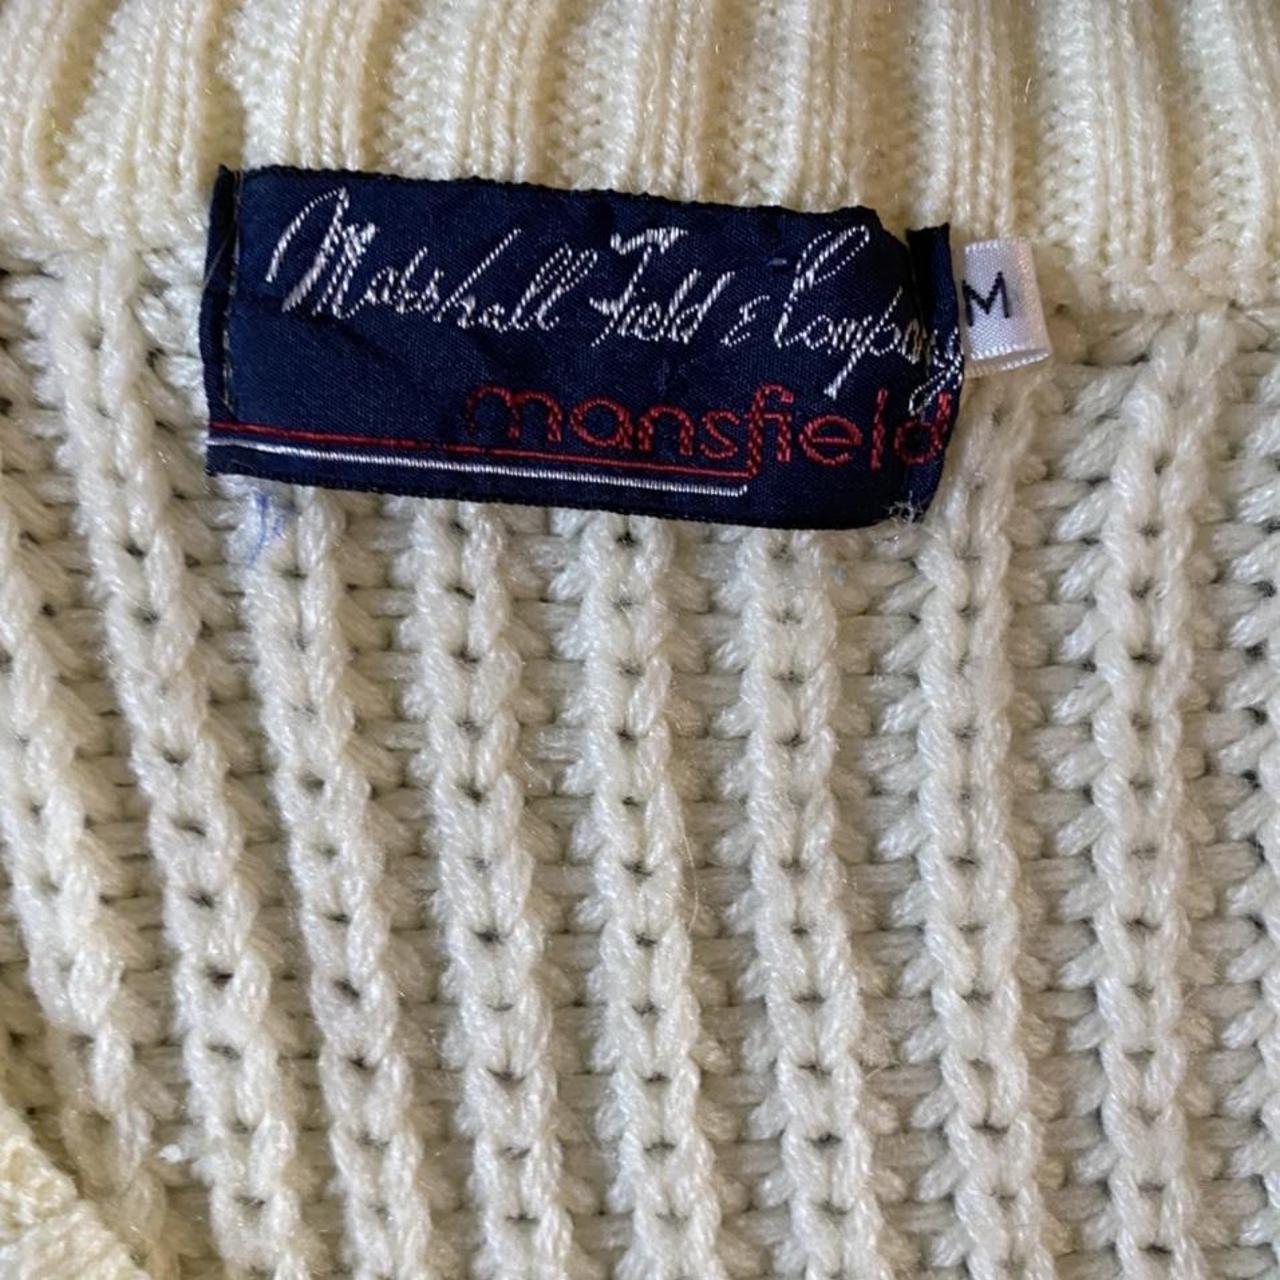 Product Image 4 - Vintage Cream Cable Knit Sweater!❄️
Pit